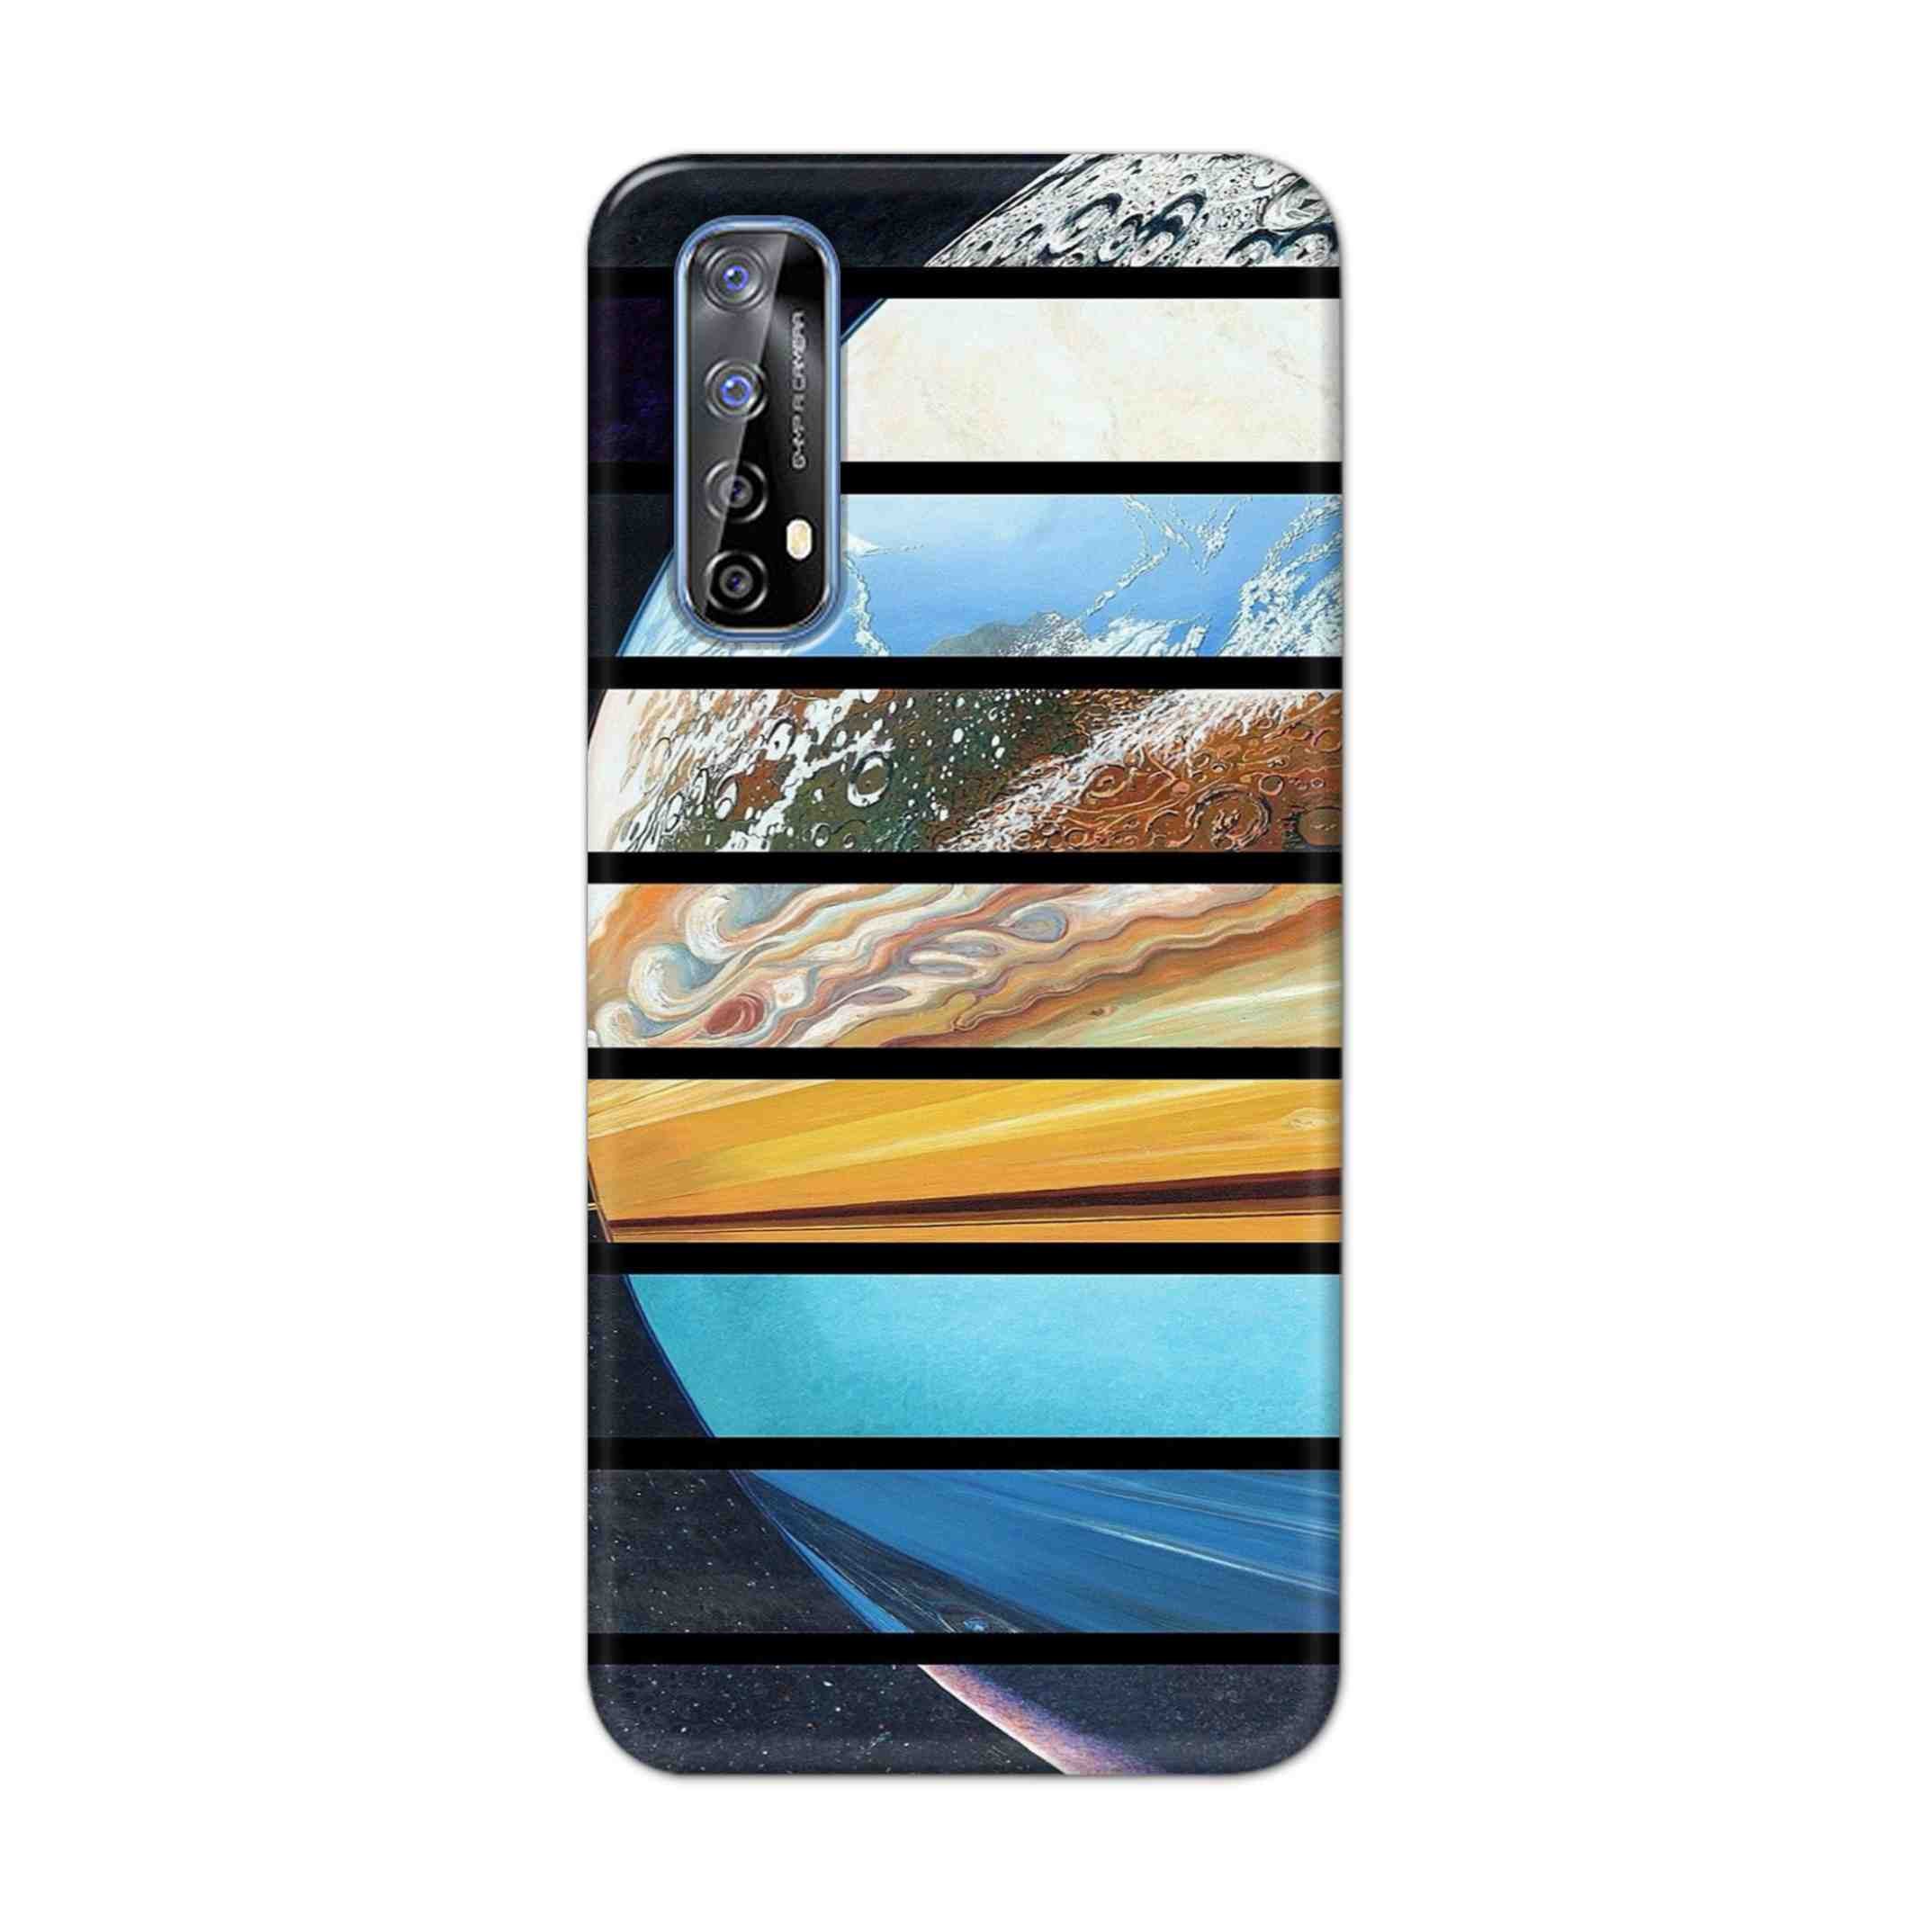 Buy Colourful Earth Hard Back Mobile Phone Case Cover For Realme 7 Online